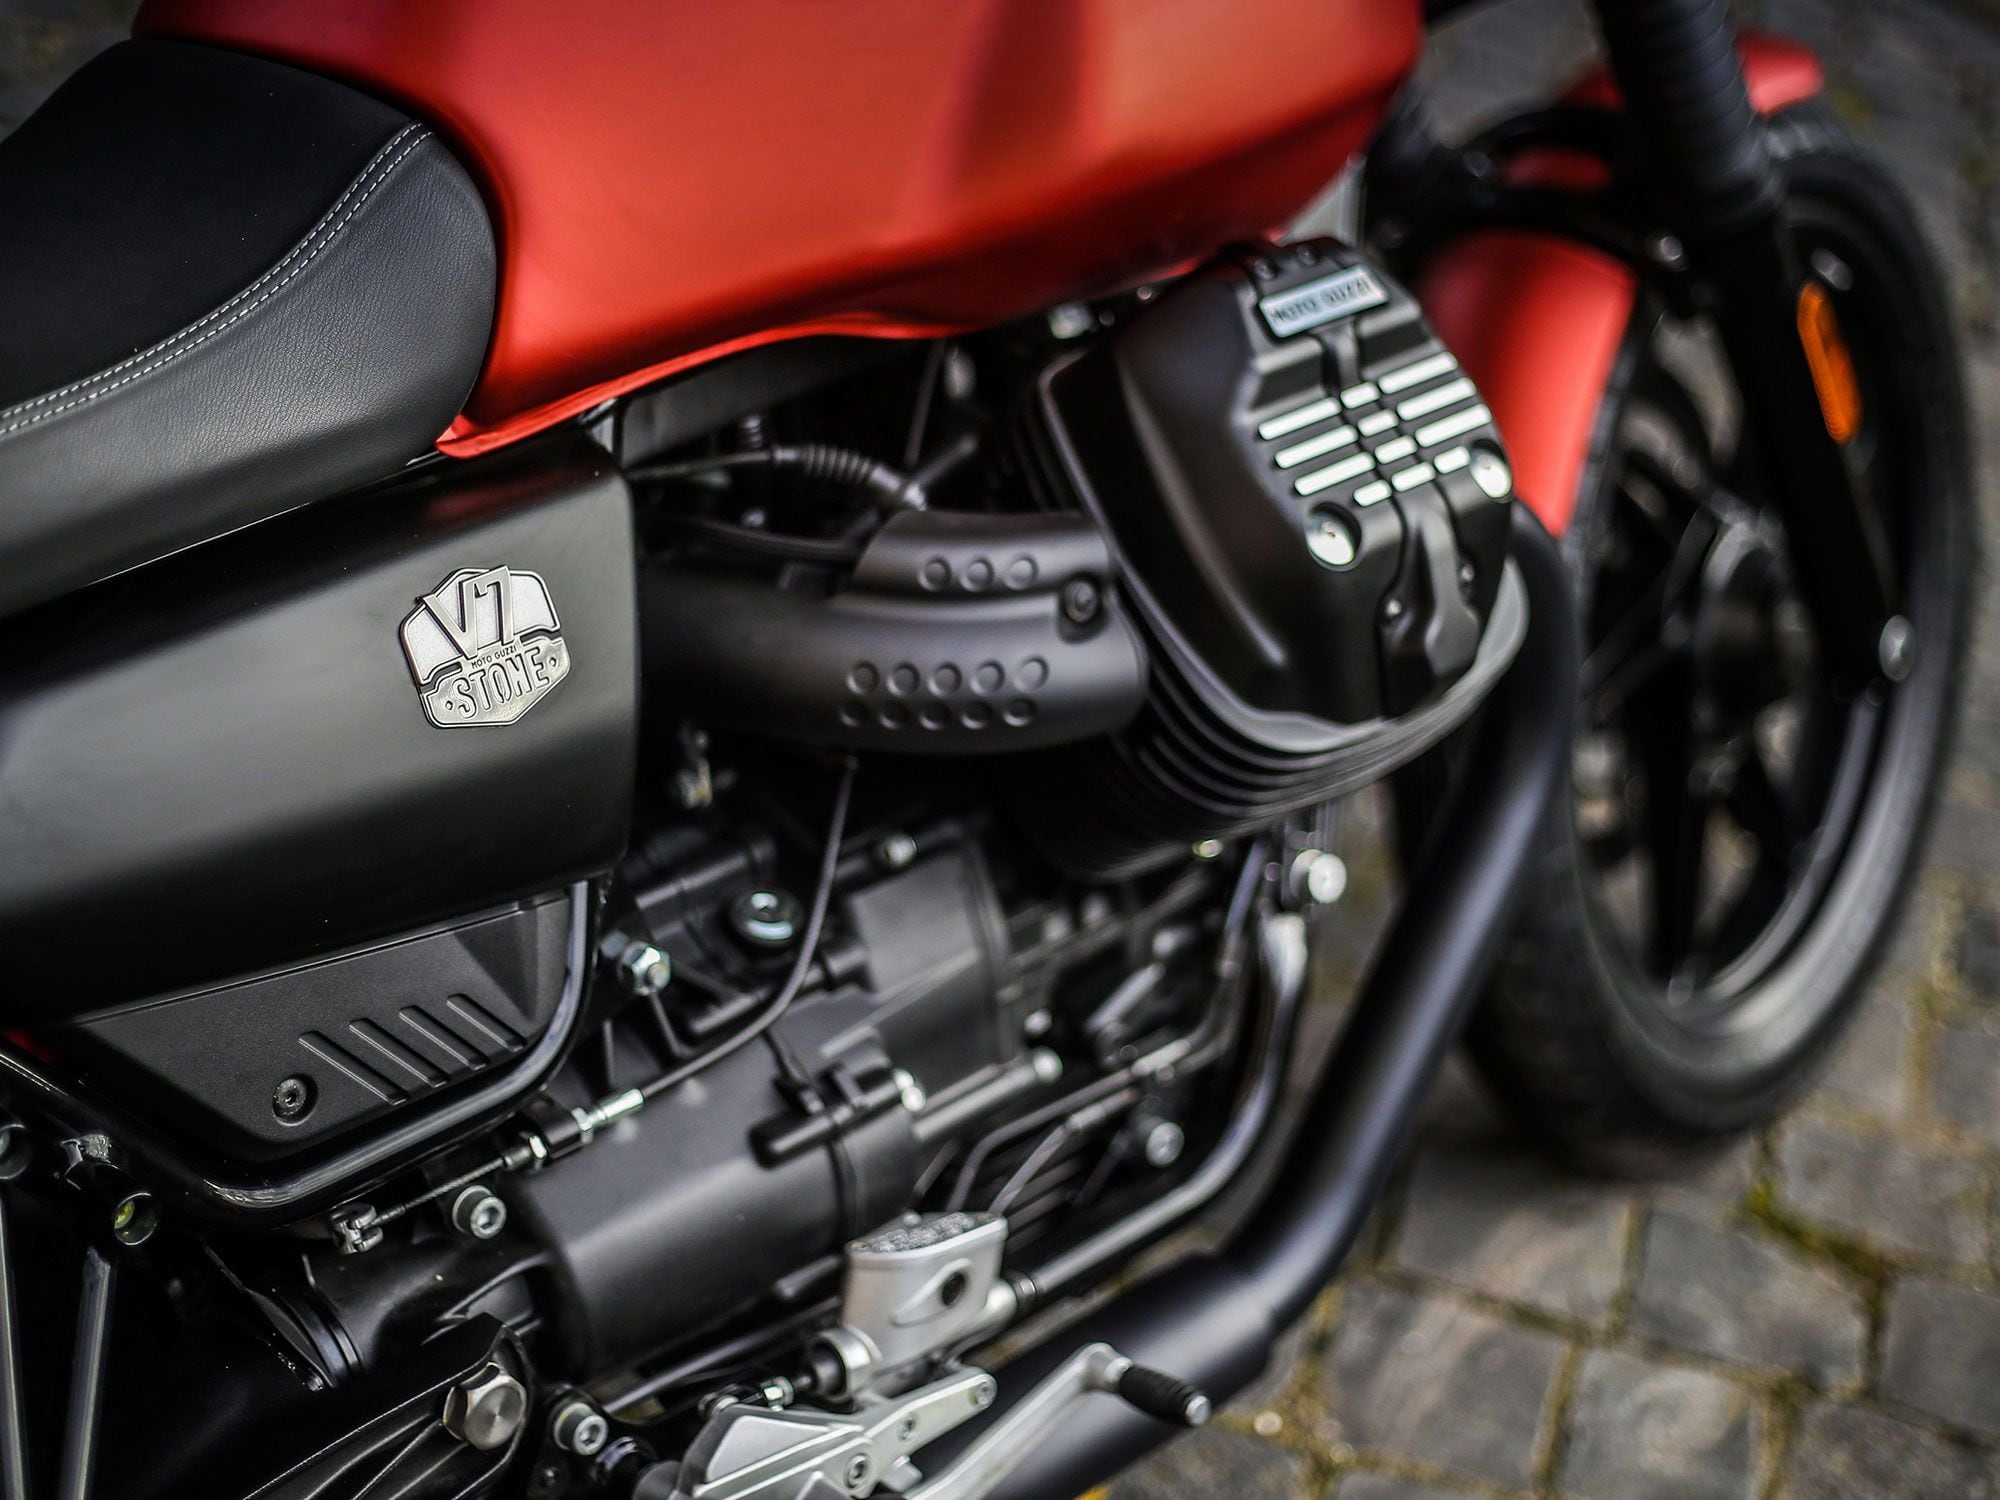 The new 853cc V-twin engine on the 2021 V7s is based on the higher-powered mill found in Guzzi’s V85 TT model.